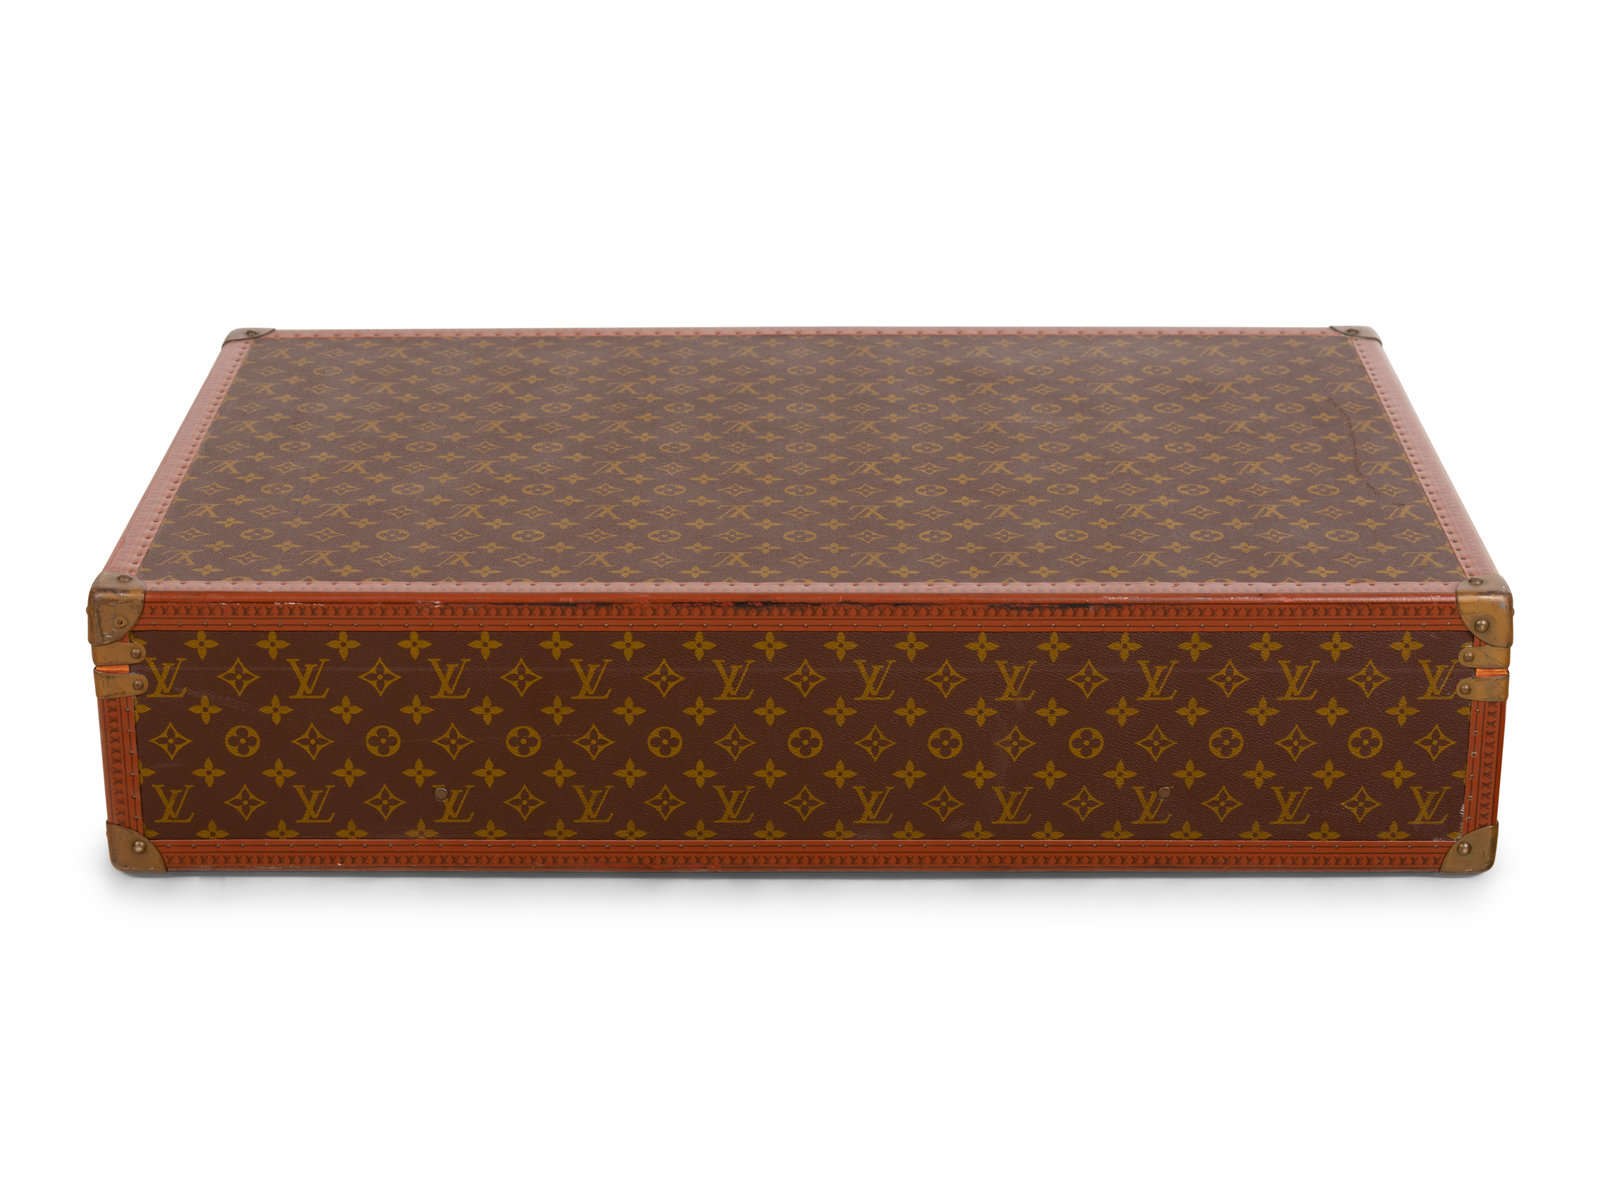 Lot - Louis Vuitton Hard-Sided Suitcase Trunk